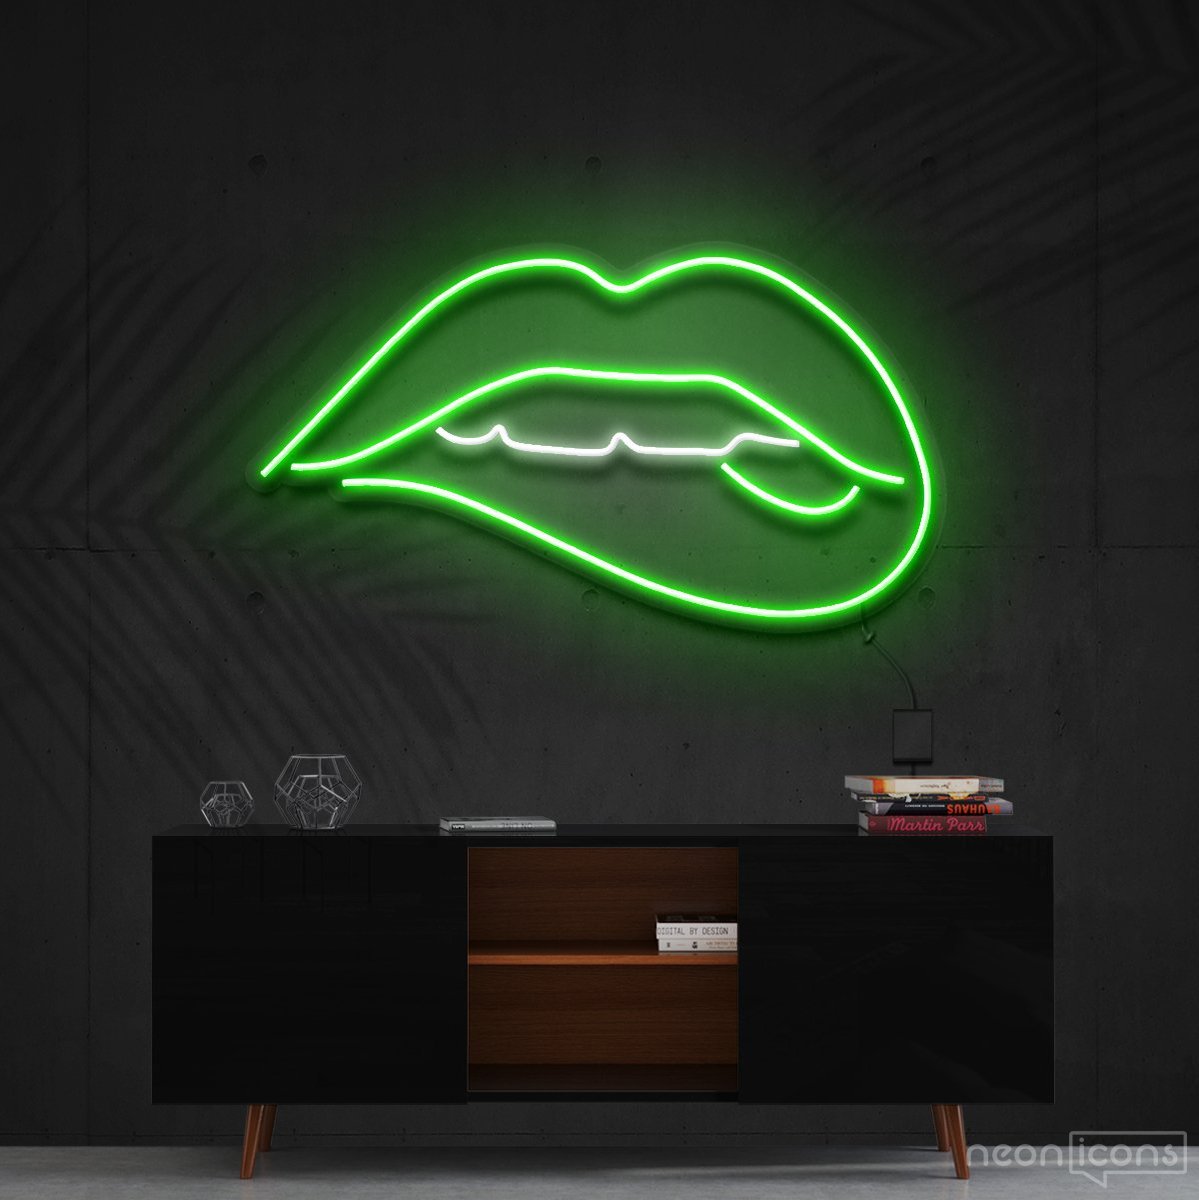 "Lips Biting" White Neon Sign 60cm (2ft) / Green / Cut to Shape by Neon Icons